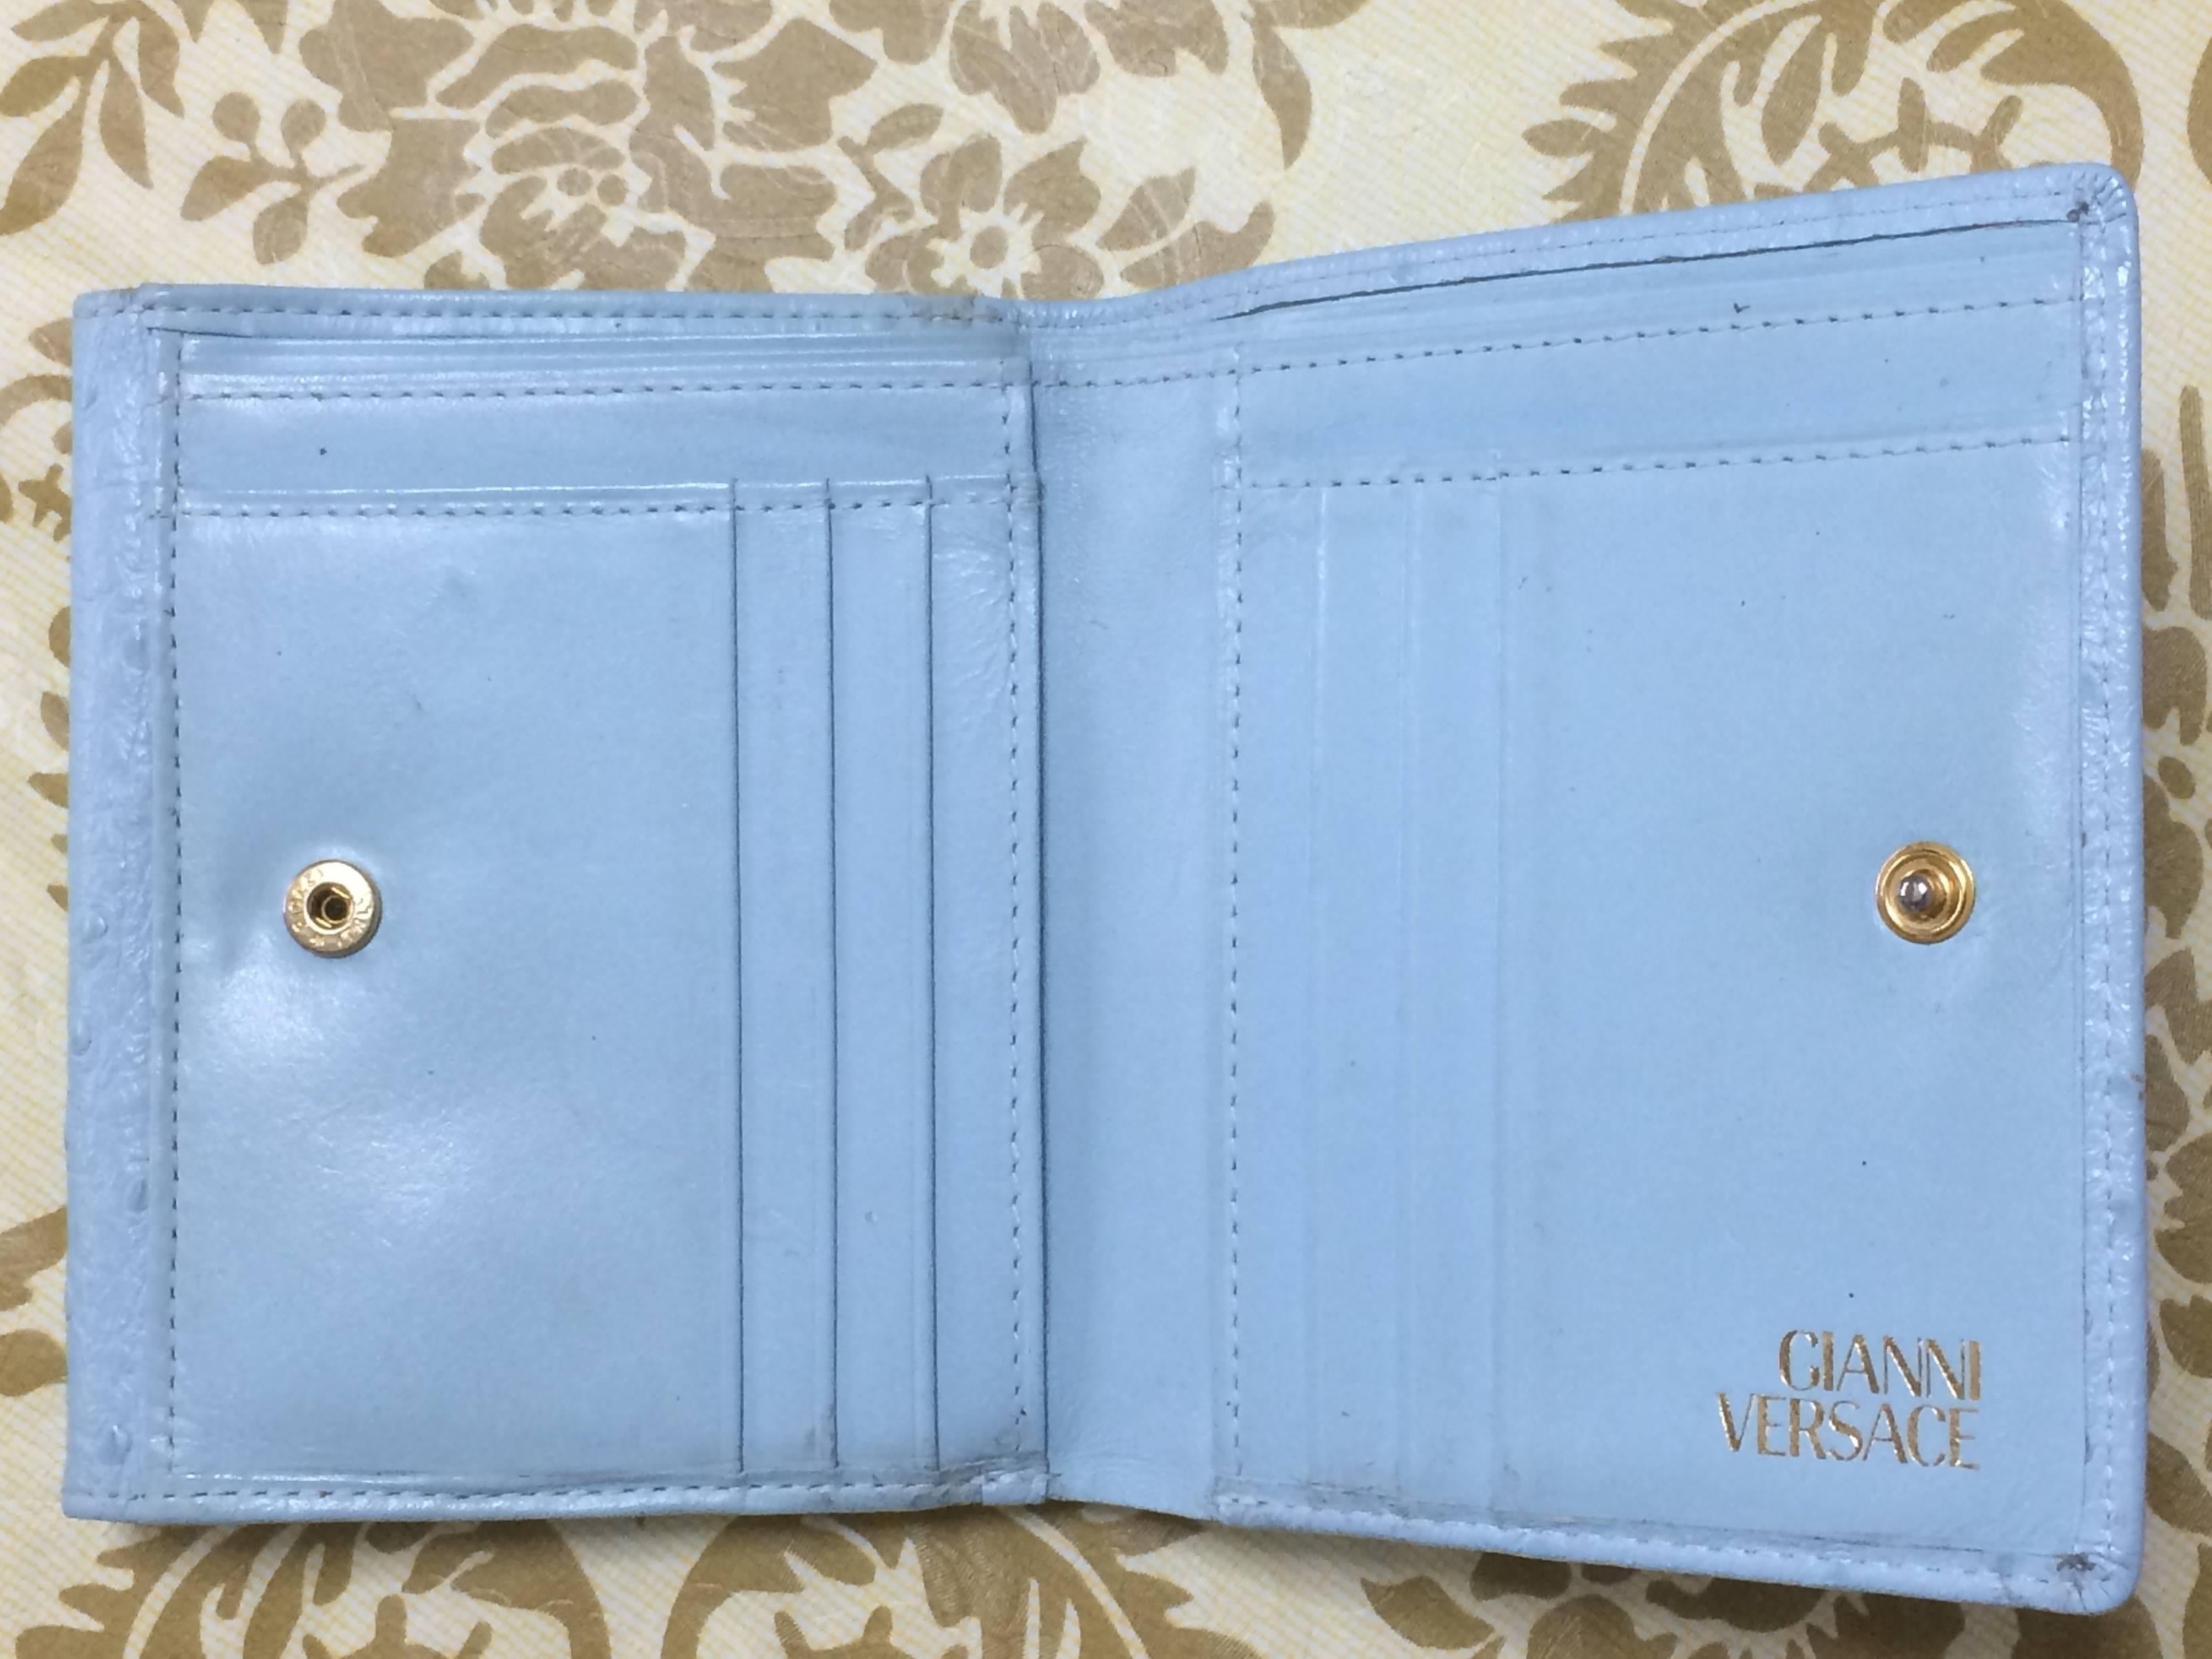 Vintage Gianni Versace ostrich-embossed light blue leather wallet with sunburst In Good Condition For Sale In Kashiwa, Chiba